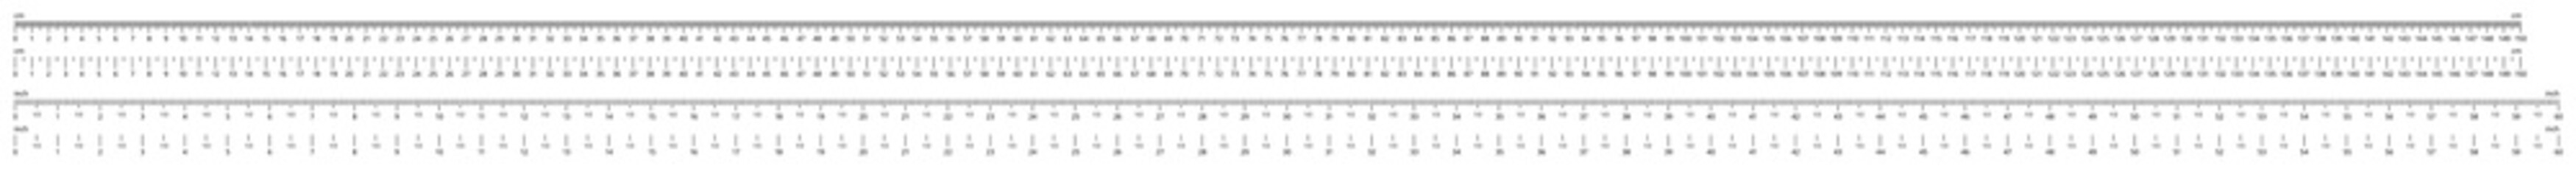 Measurement ruler. Measuring tools scales, 150 centimeters scale and 60 inches rulers vector illustration